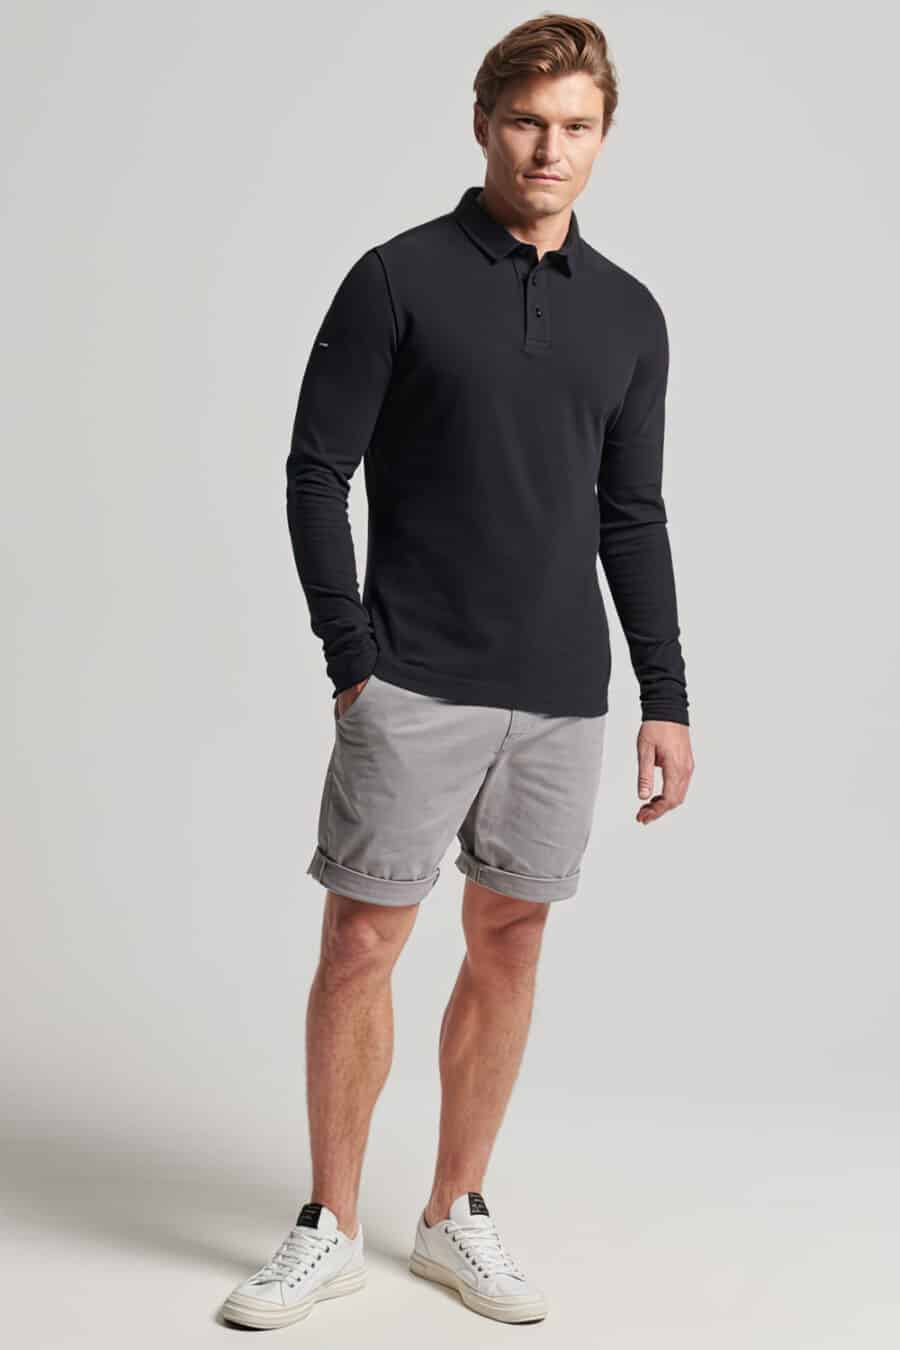 Men's grey chinos shorts, long sleeve black polo shirt and white sneakers outfit